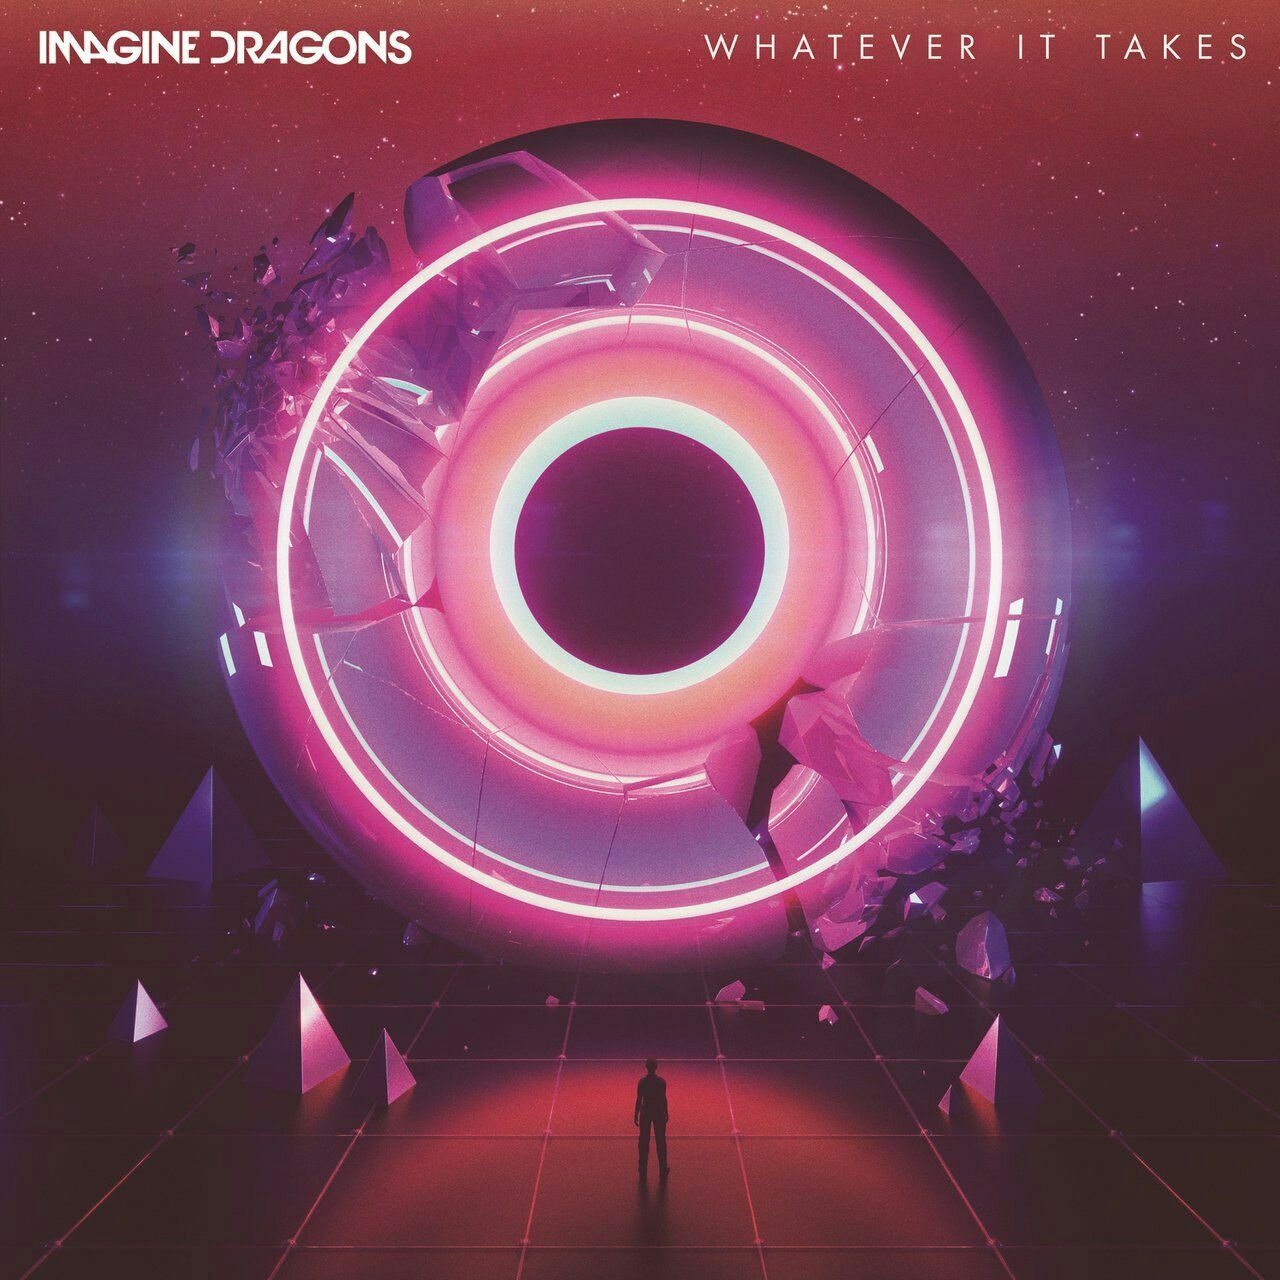 Imagine Dragons - Whatever It Takes review by Snowbuyer - Album of The Year